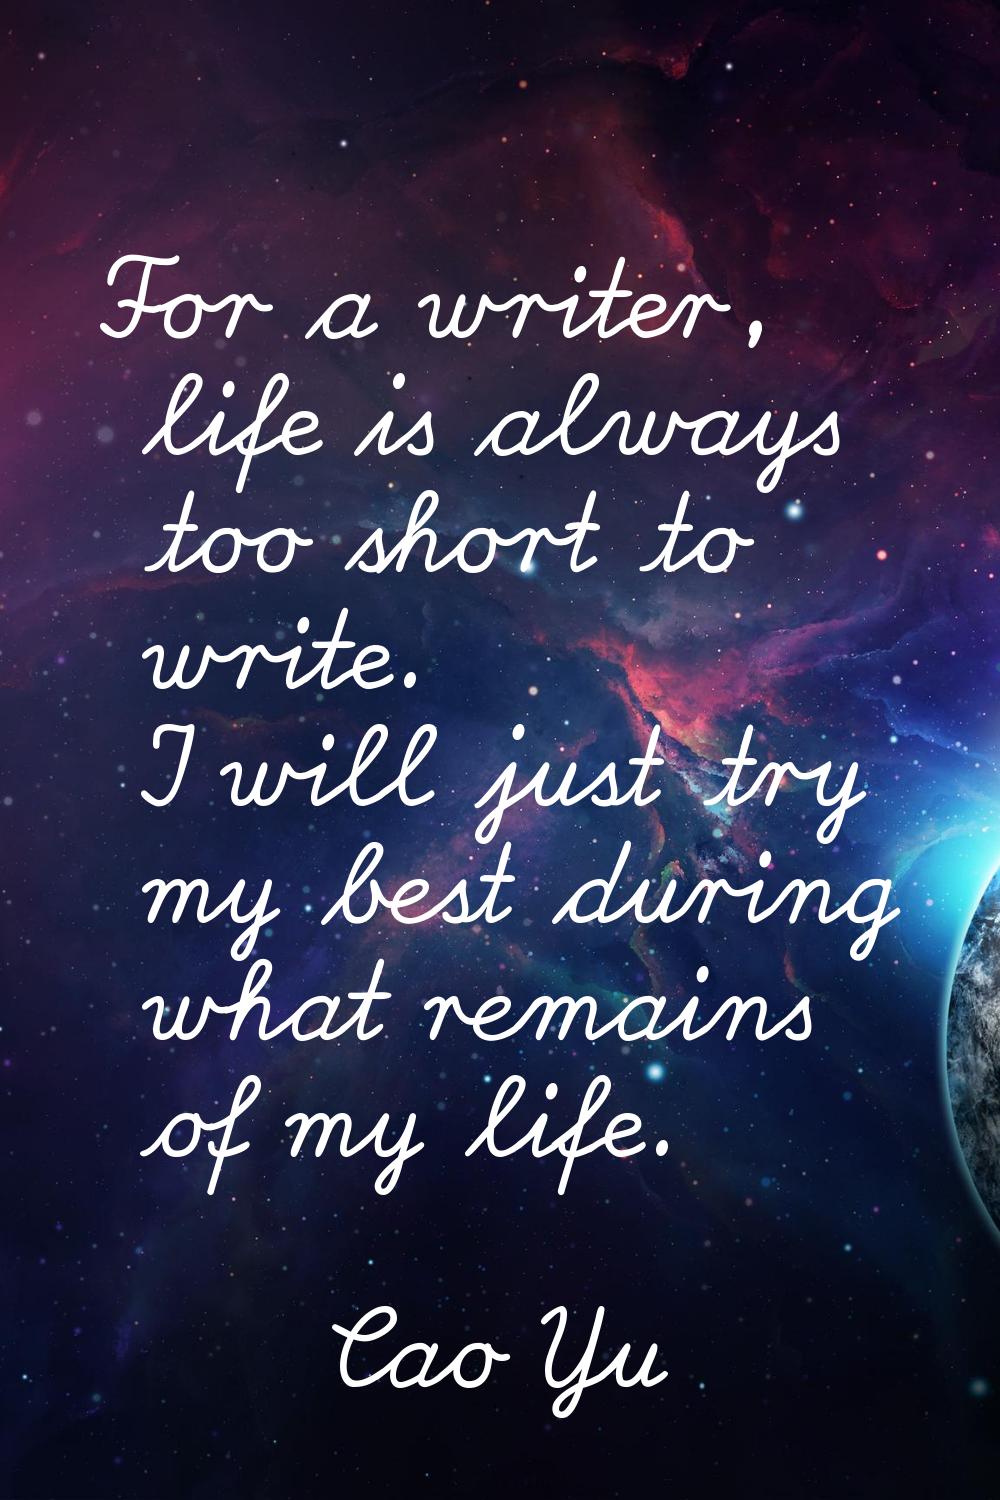 For a writer, life is always too short to write. I will just try my best during what remains of my 